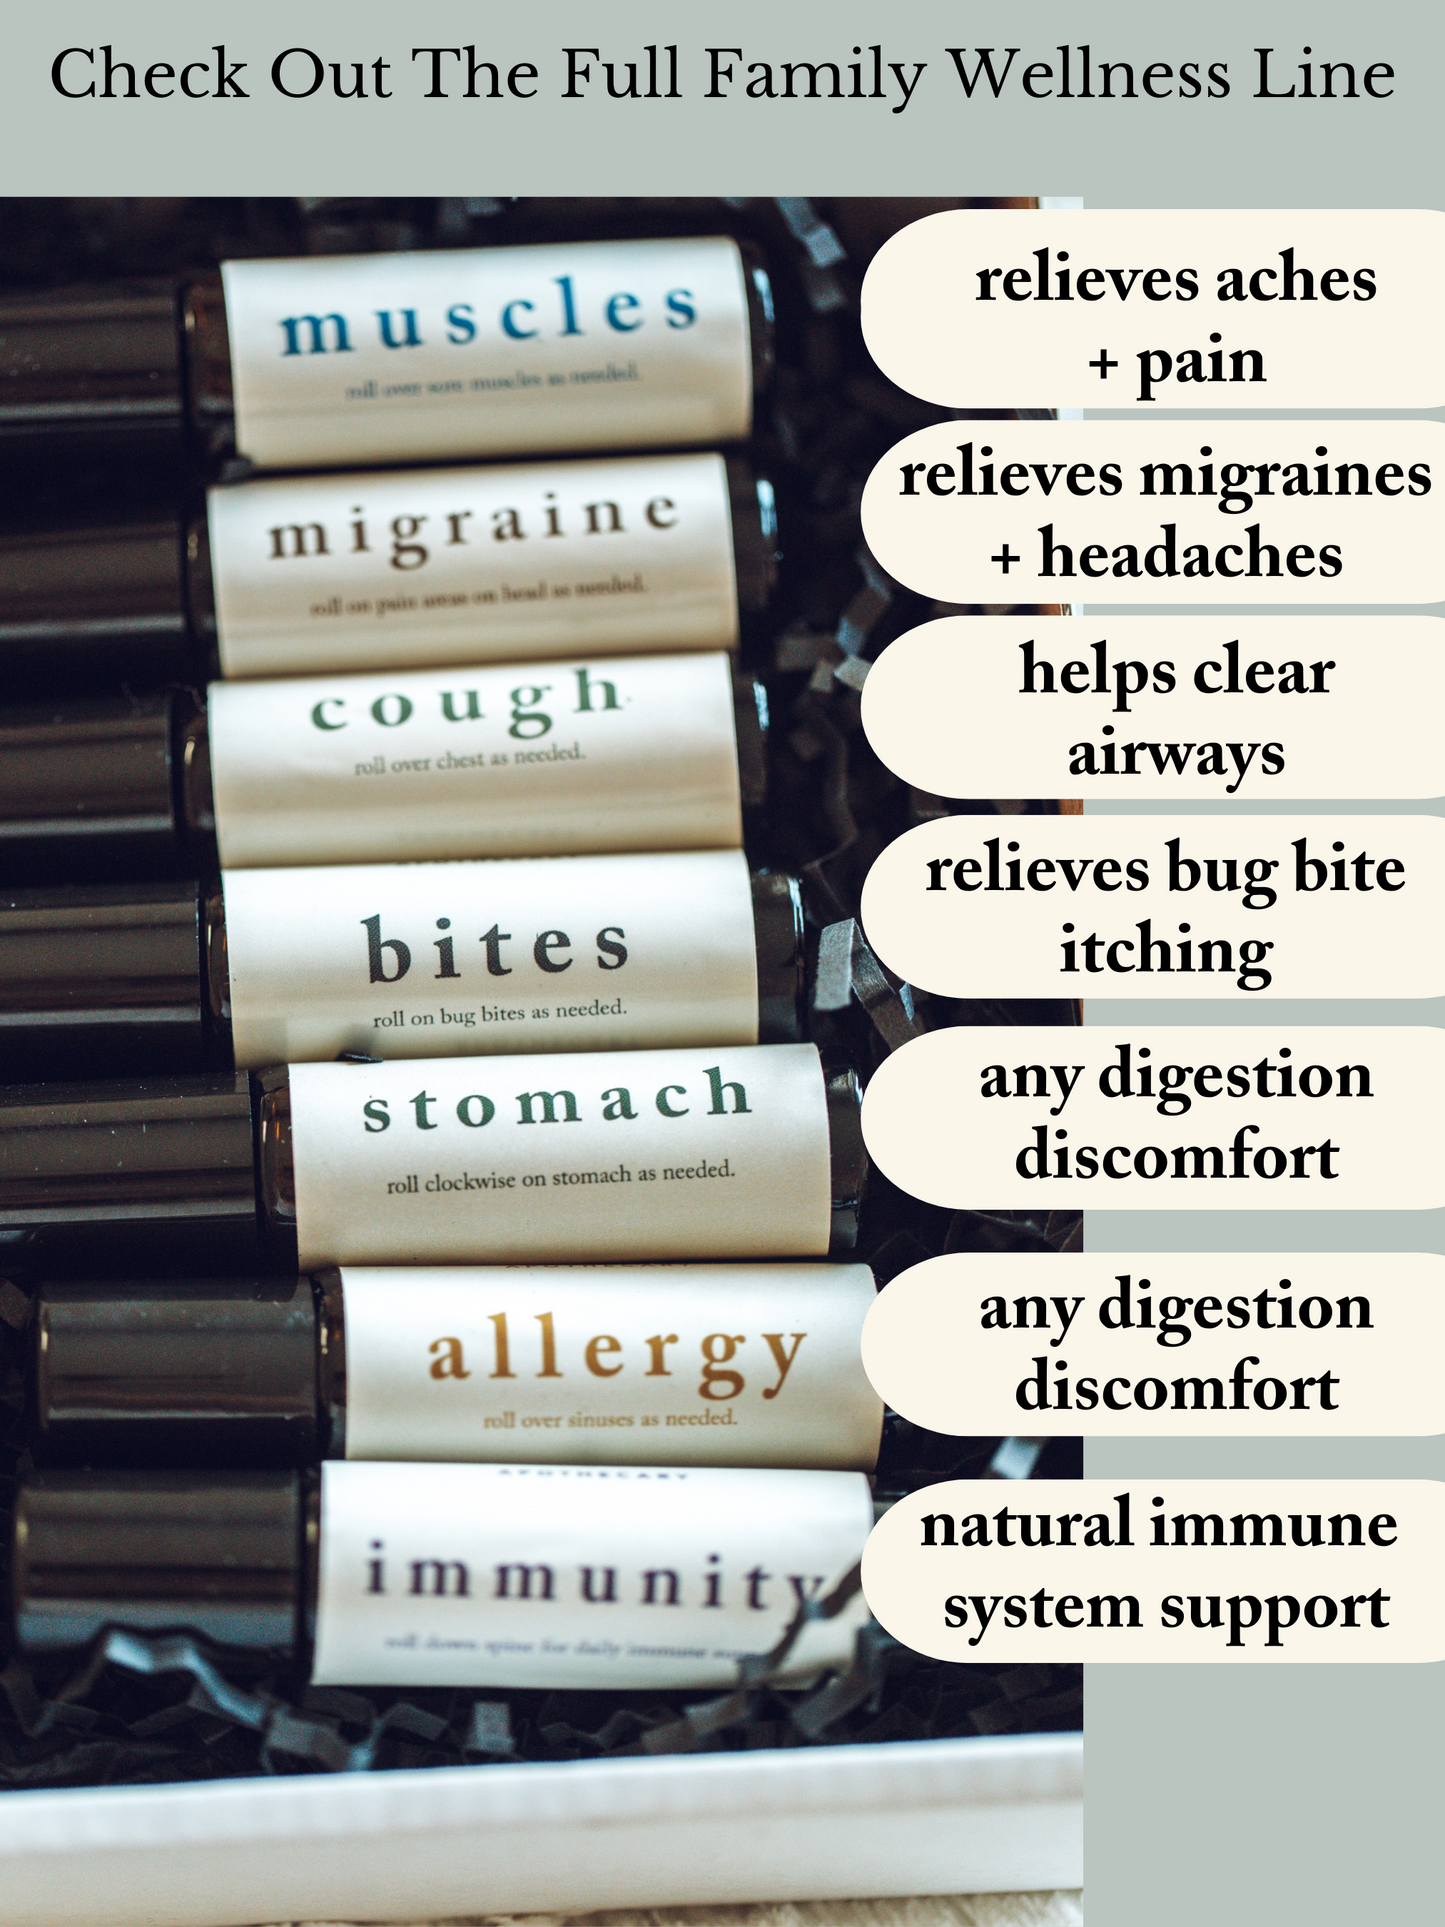 Allergy Relief Essential Oil Blend